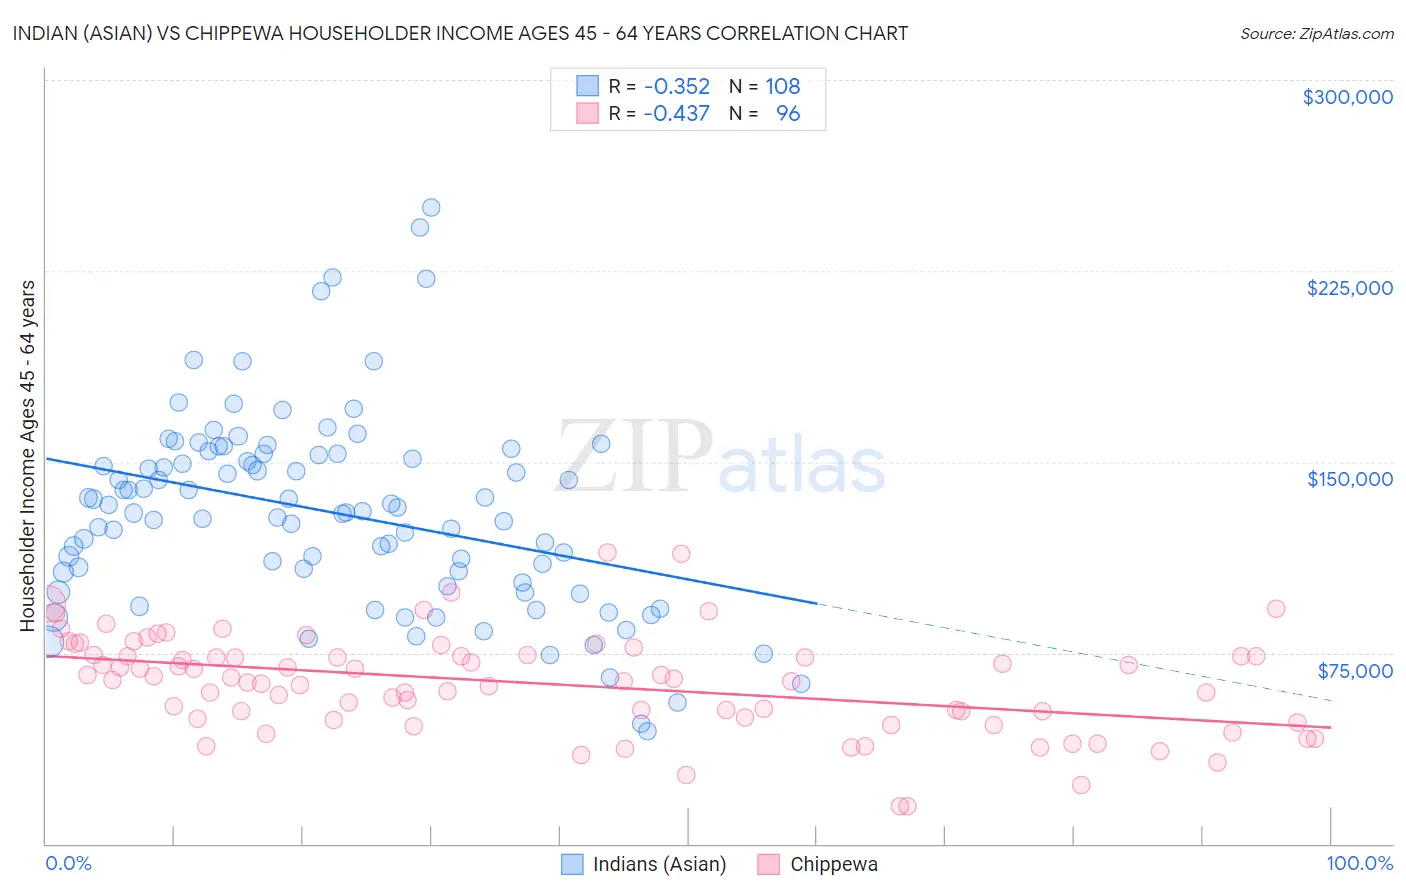 Indian (Asian) vs Chippewa Householder Income Ages 45 - 64 years